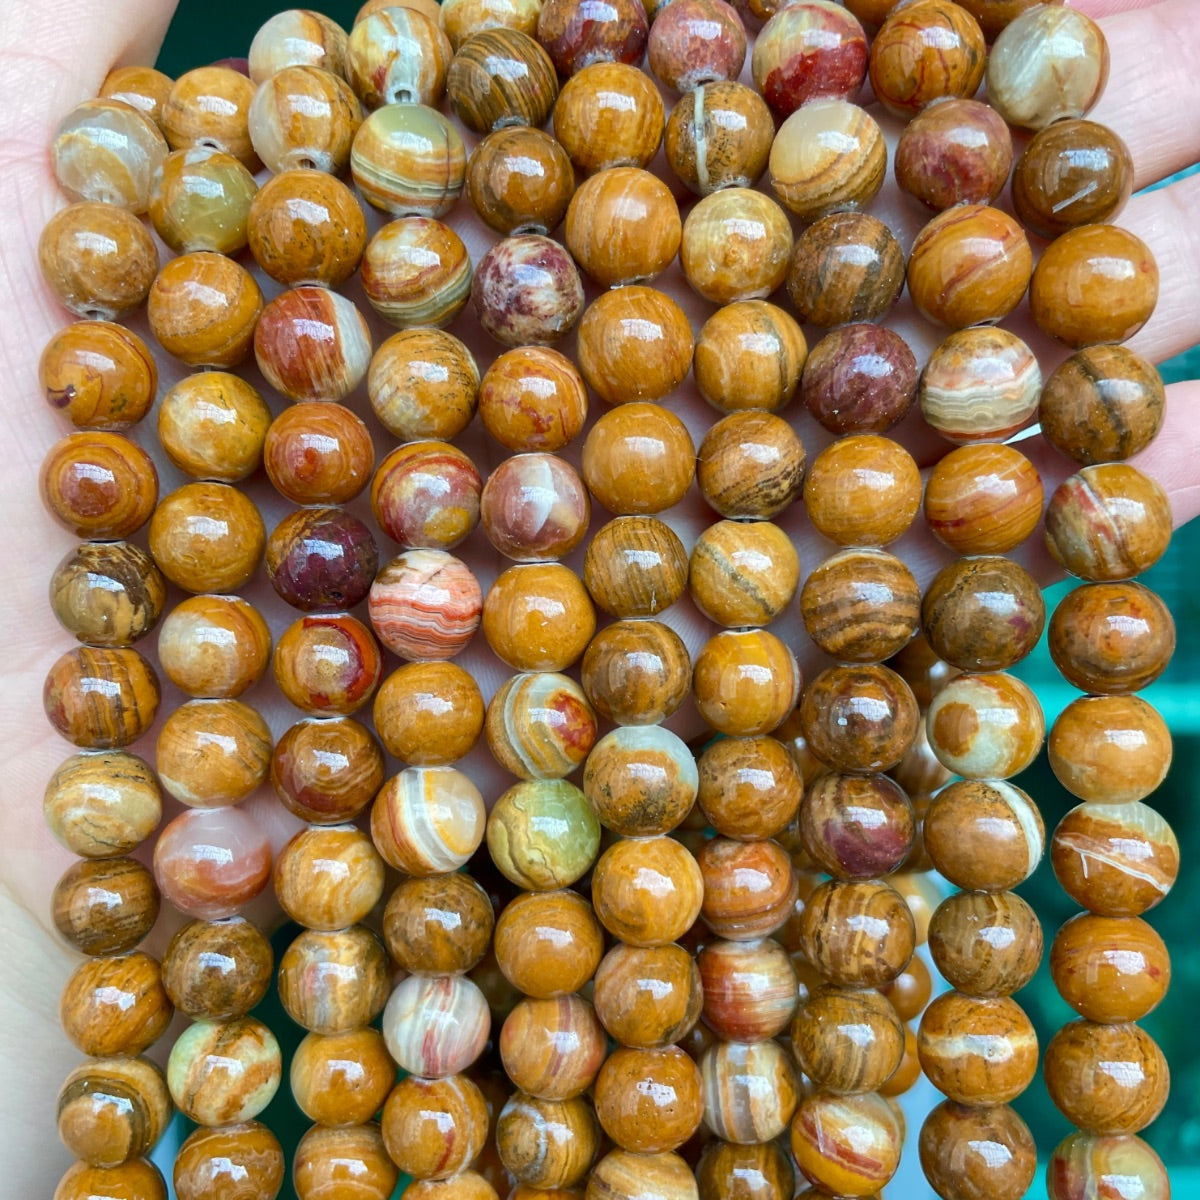 2 Strands/lot 8/10/12mm Brown Natural Stone Round Beads Stone Beads 12mm Stone Beads 8mm Stone Beads New Beads Arrivals Other Stone Beads Charms Beads Beyond